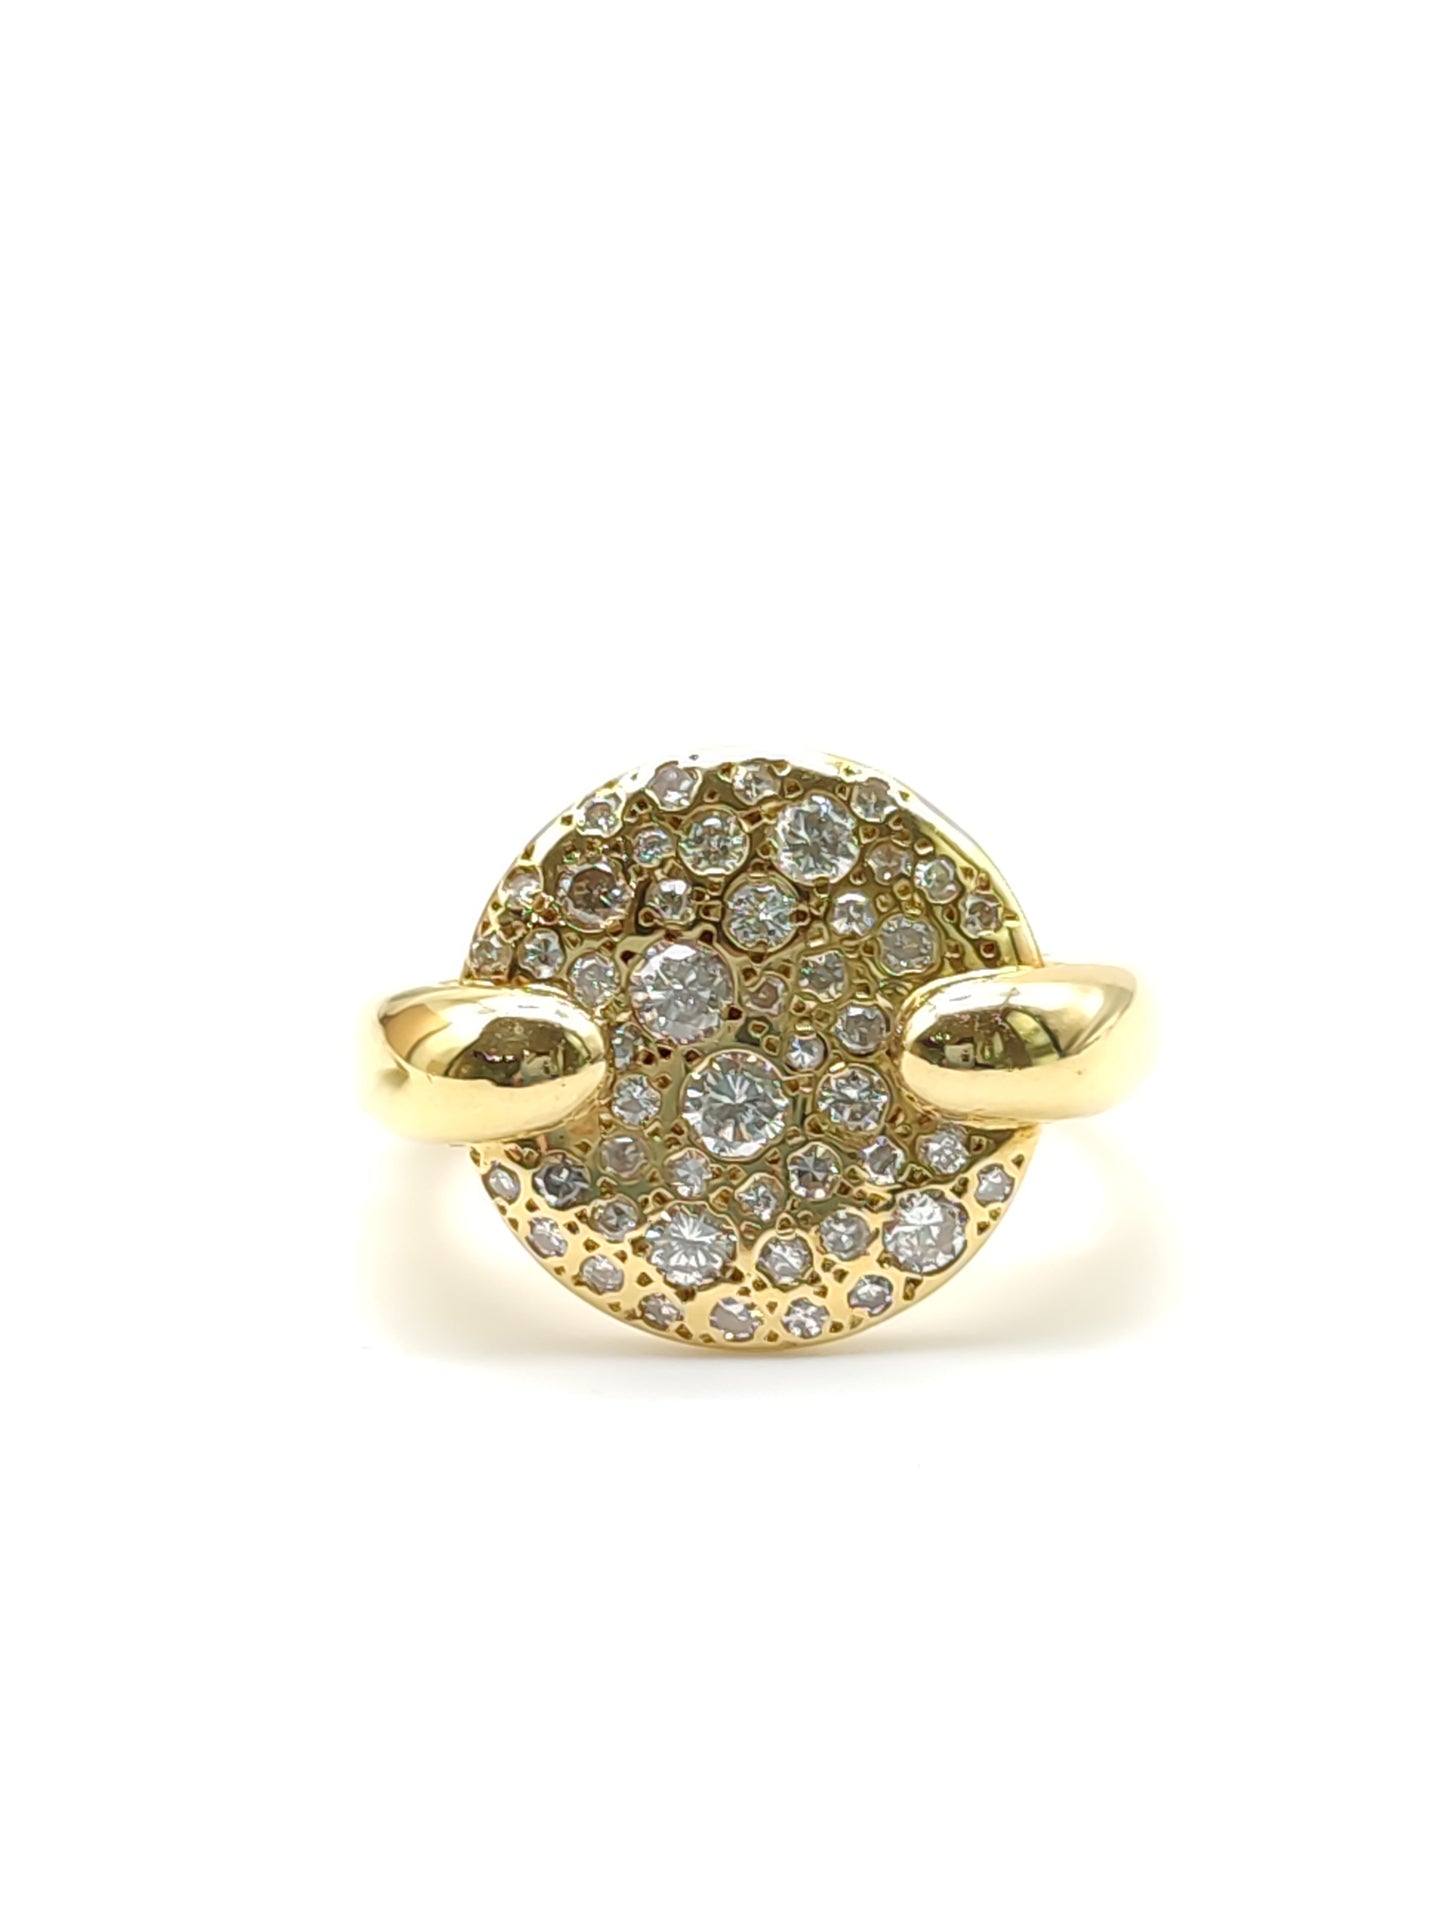 Pavan - Band ring in yellow gold